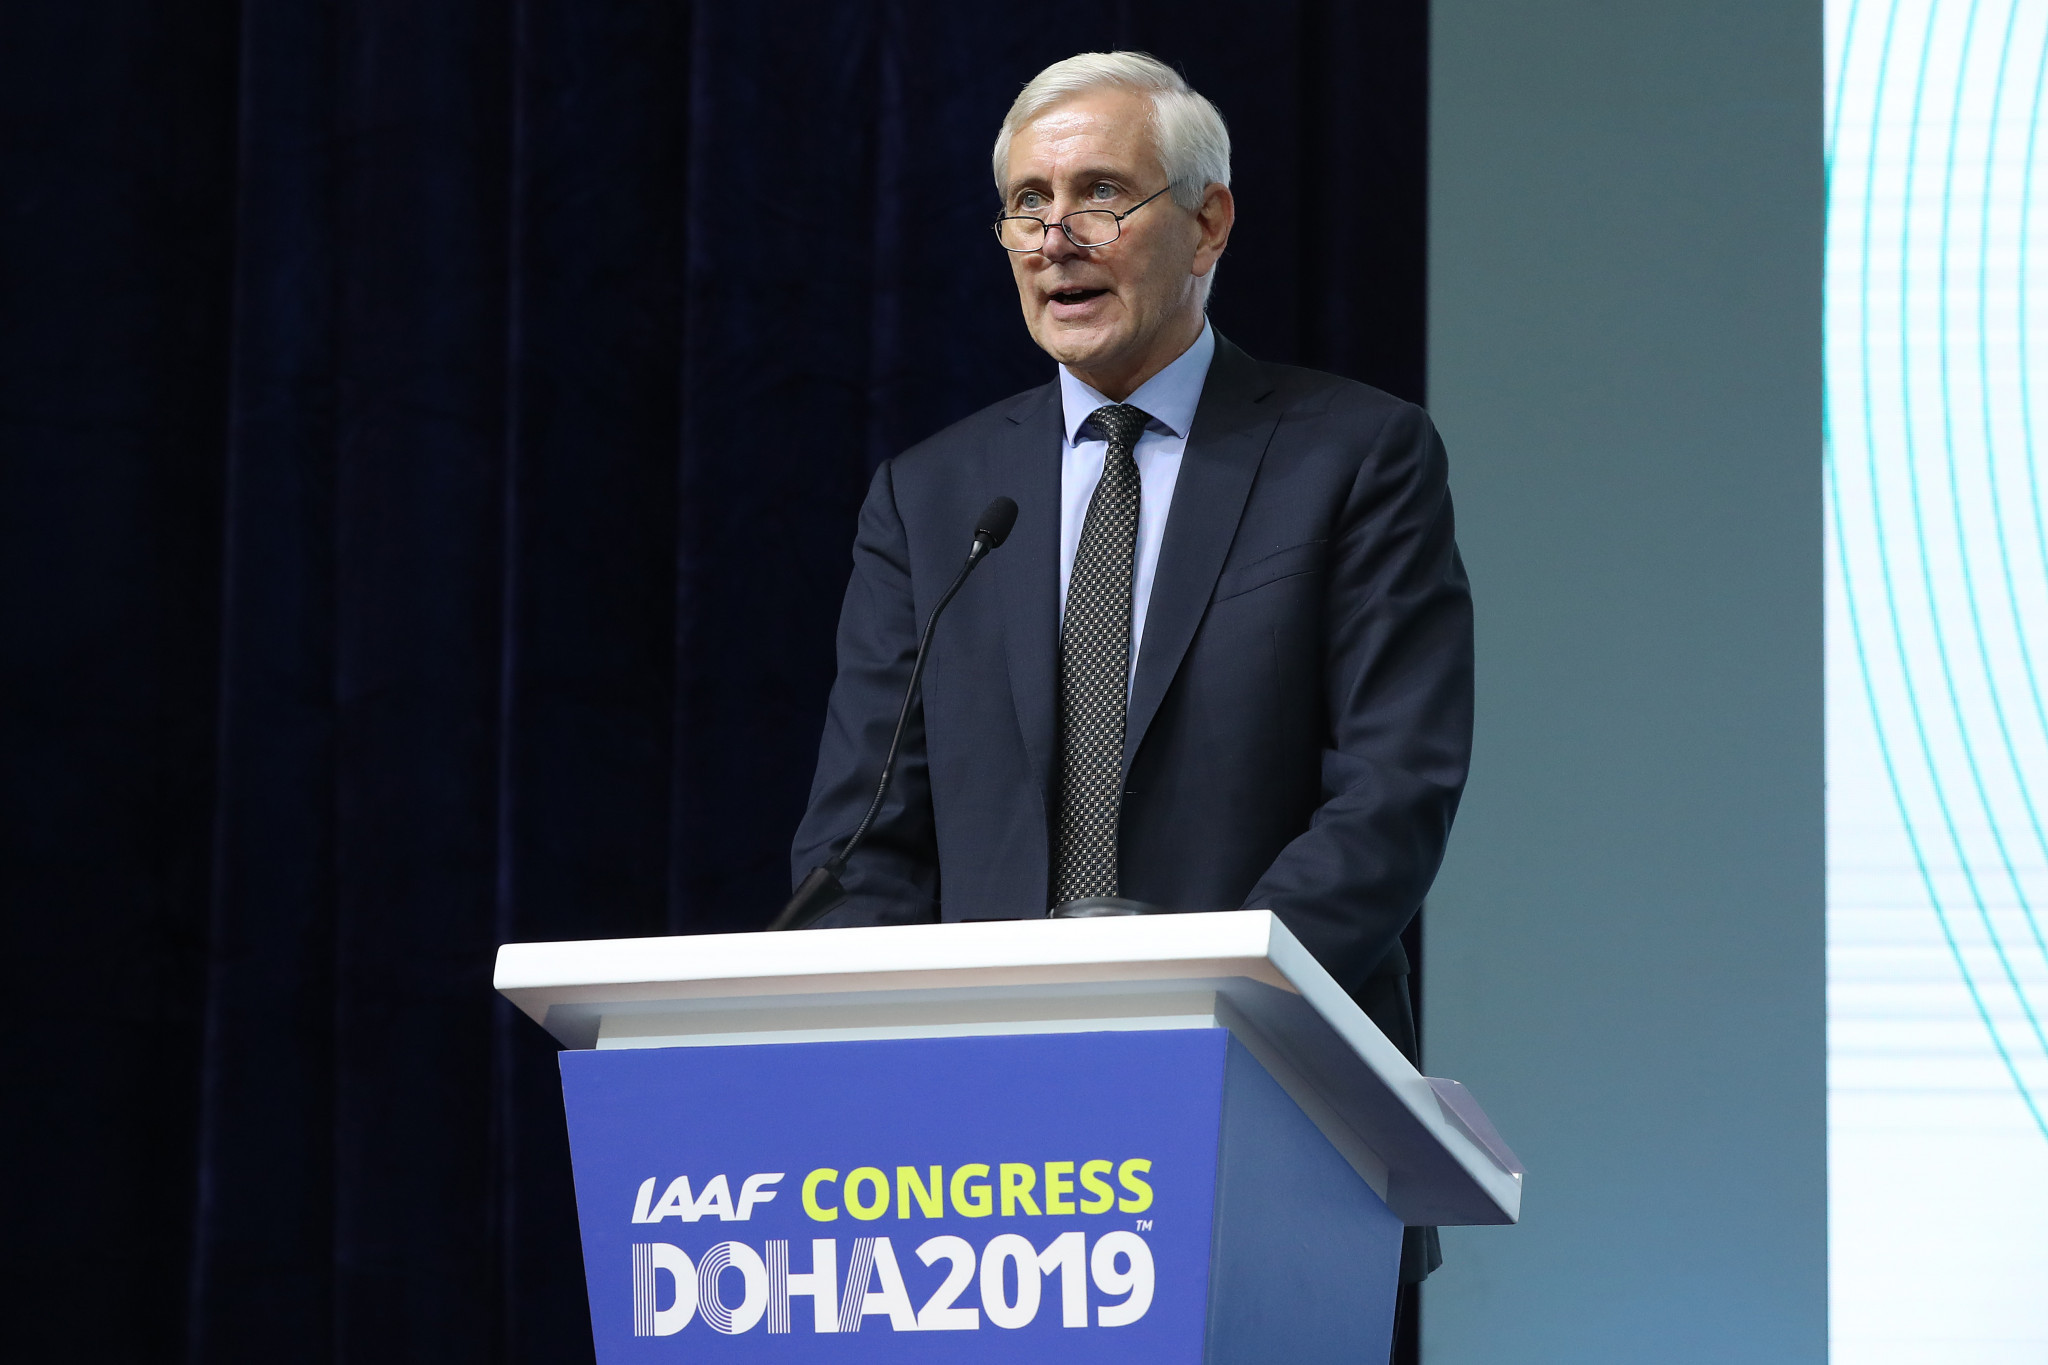 Before the elections, the IAAF Congress backed the decision to continue the suspension of Russia following a presentation by Rune Andersen, head of the world governing body's Taskforce ©Getty Images